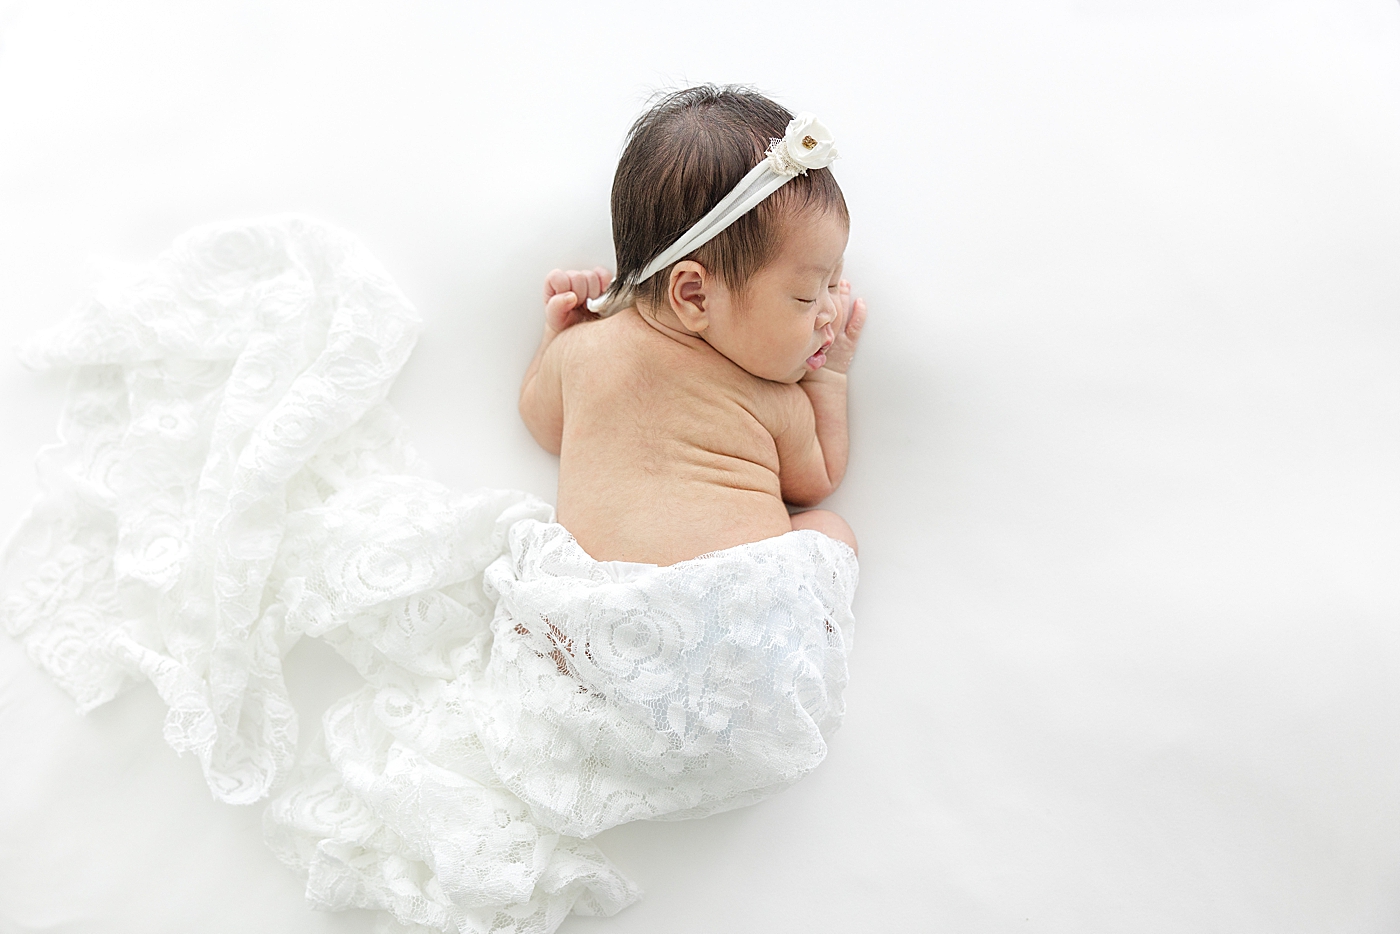 Sleeping newborn wrapped in a piece of lace | Image by Sana Ahmed